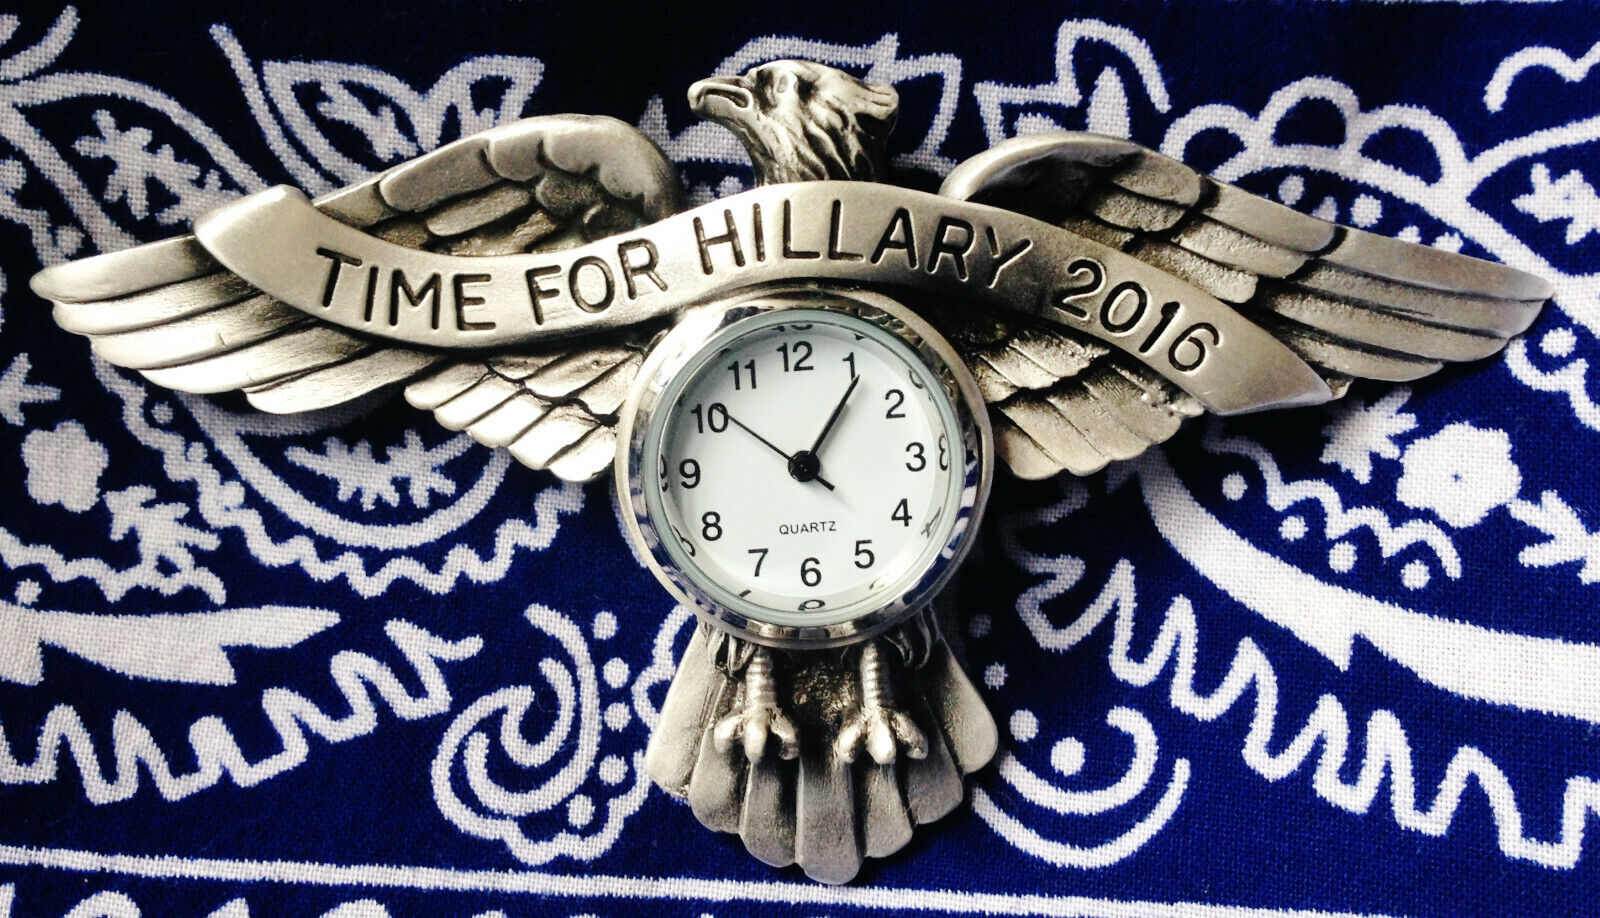 HUGE VINTAGE EAGLE PIN FIGURAL WATCH BROOCH TIME FOR HILLARY CLINTON PRESIDENT